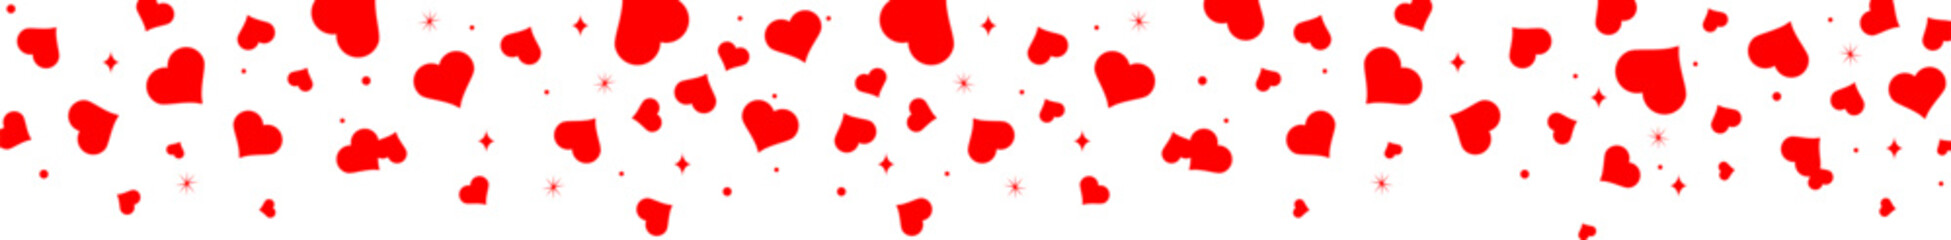 Seamless hearts border. Flying red hearts confetti. Valentine's Day background with a red falling hearts. Love concept.